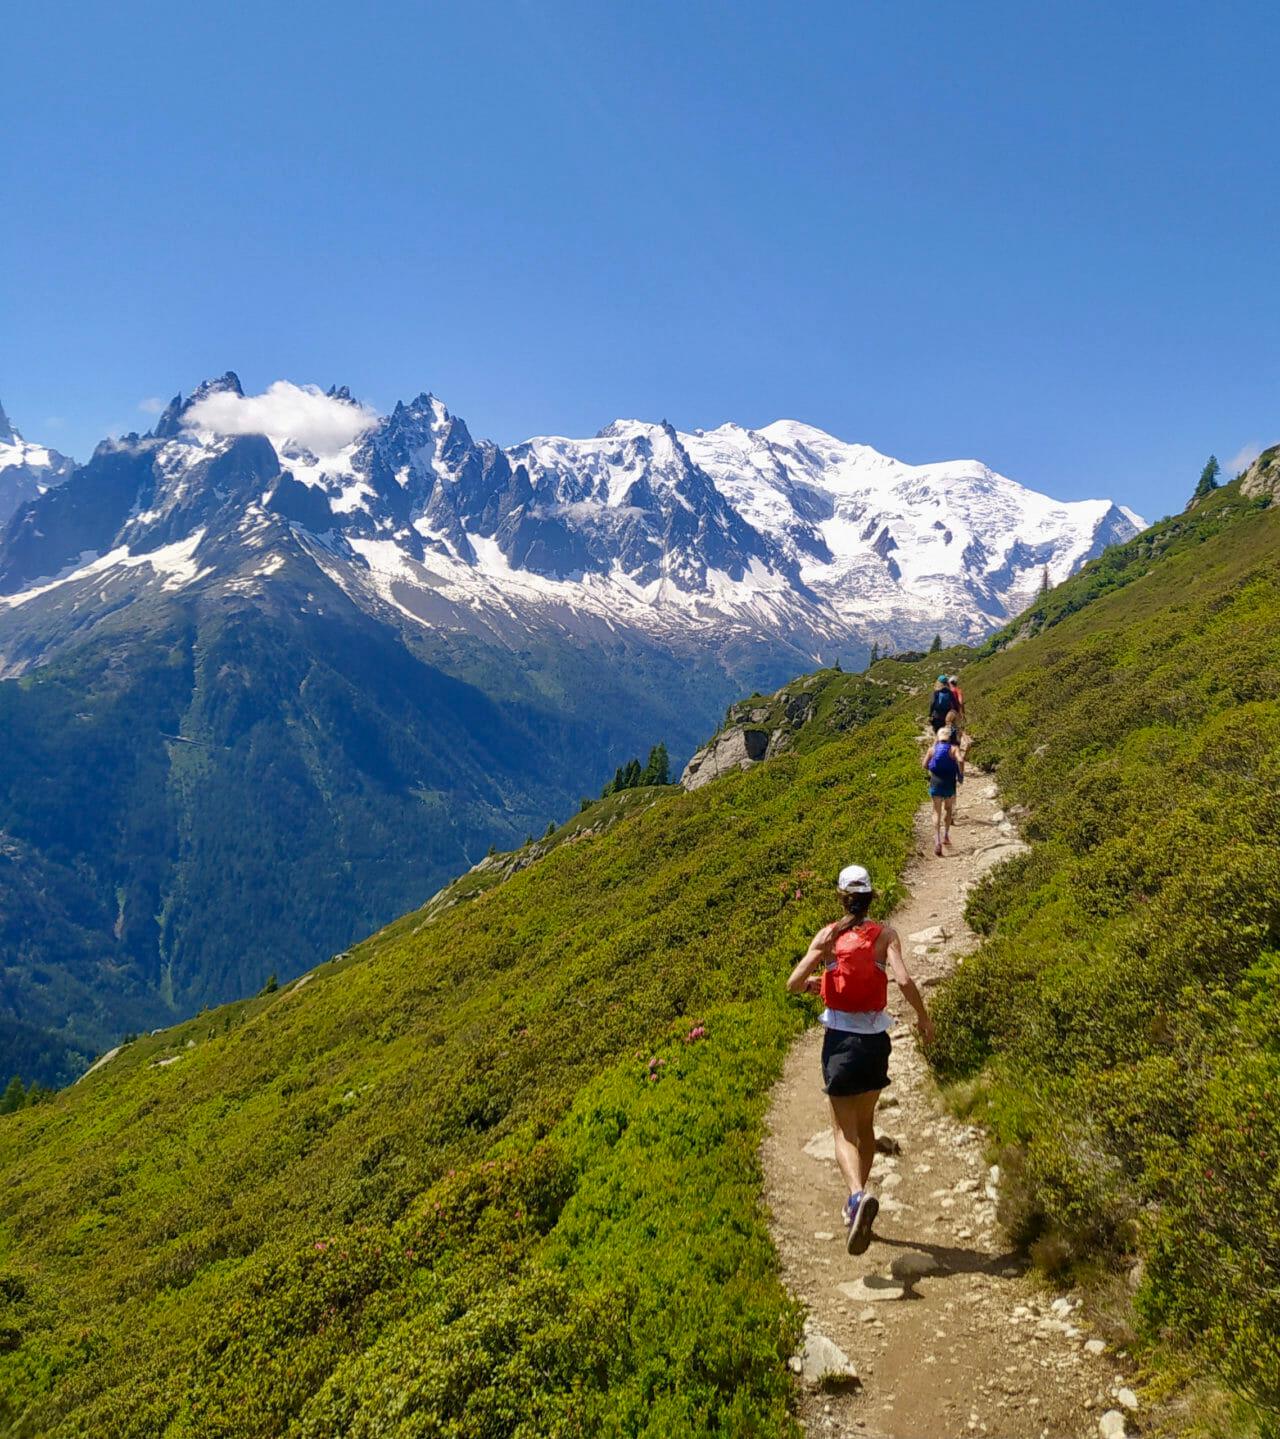 Trail runners from the back on a single trail through a pasture in the Alps with snowy mountains in the background